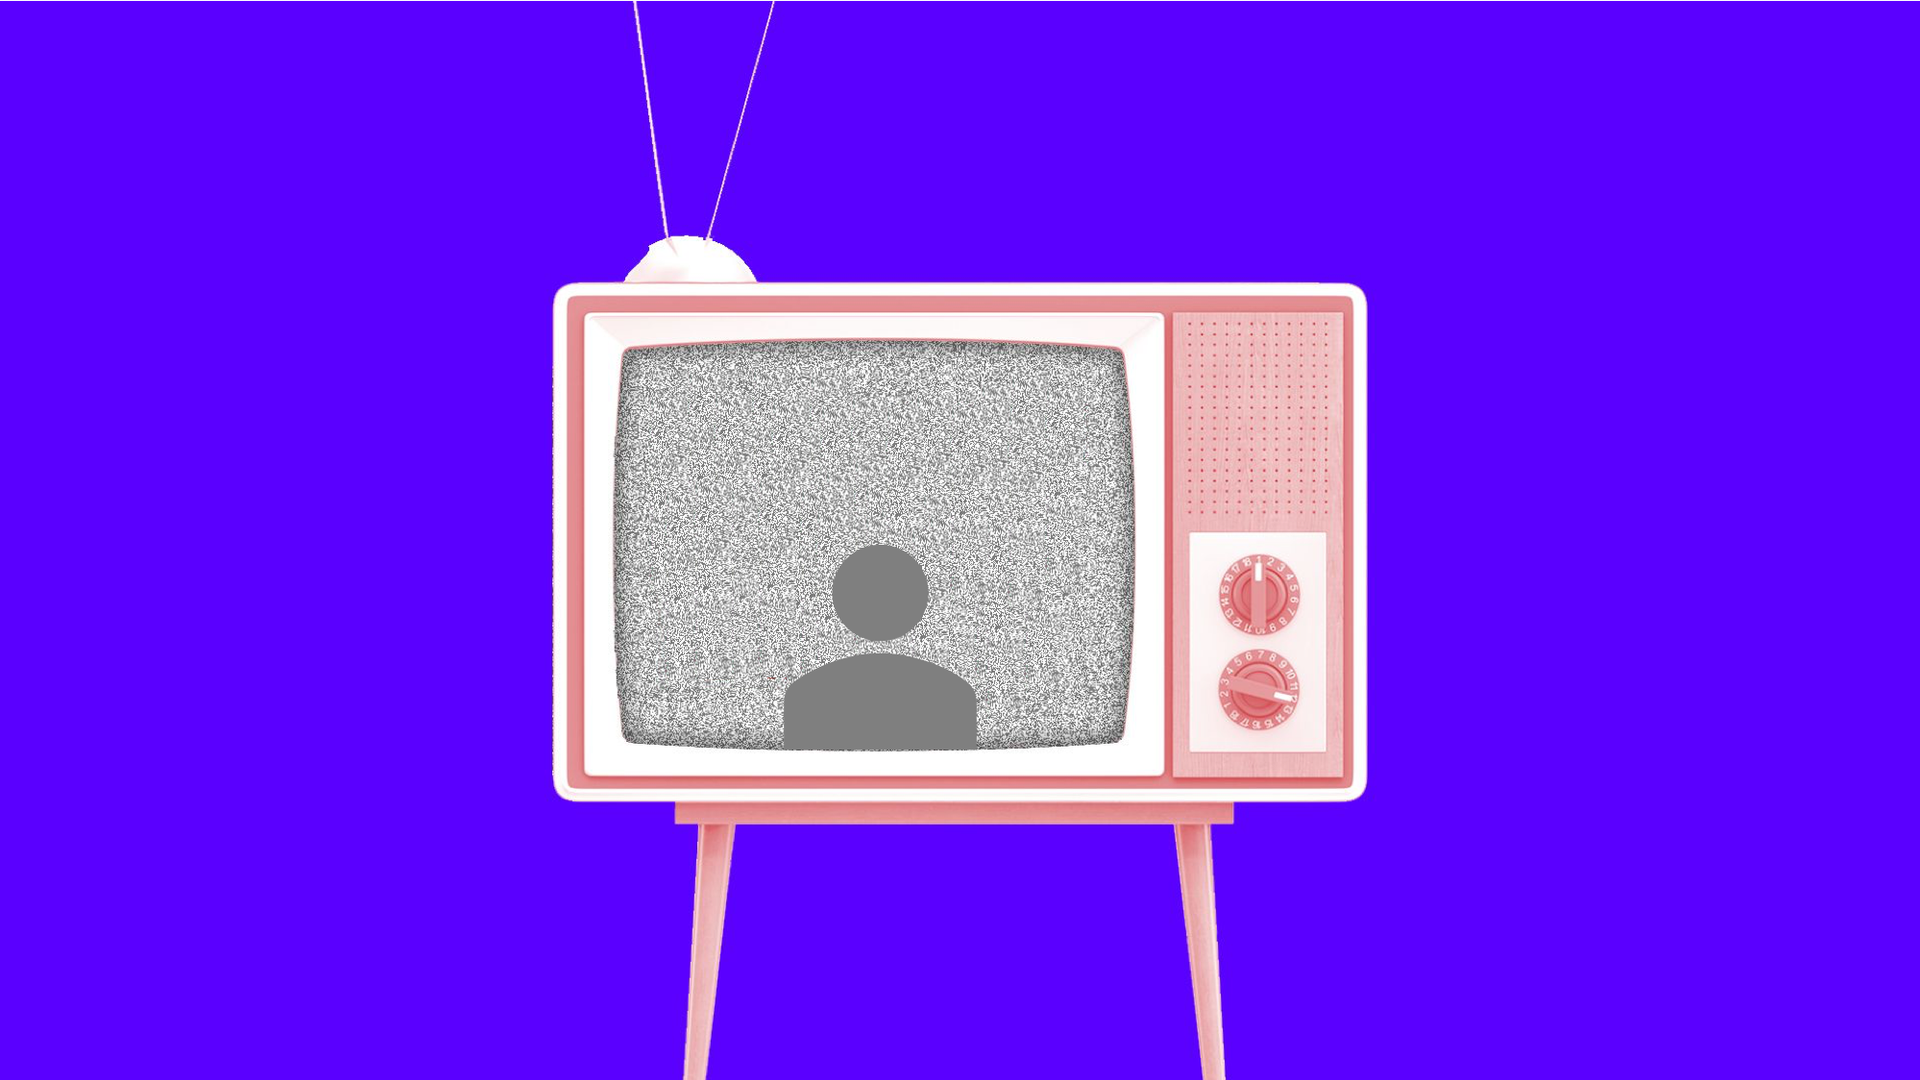 Illustration of a TV set showing a social media icon on screen